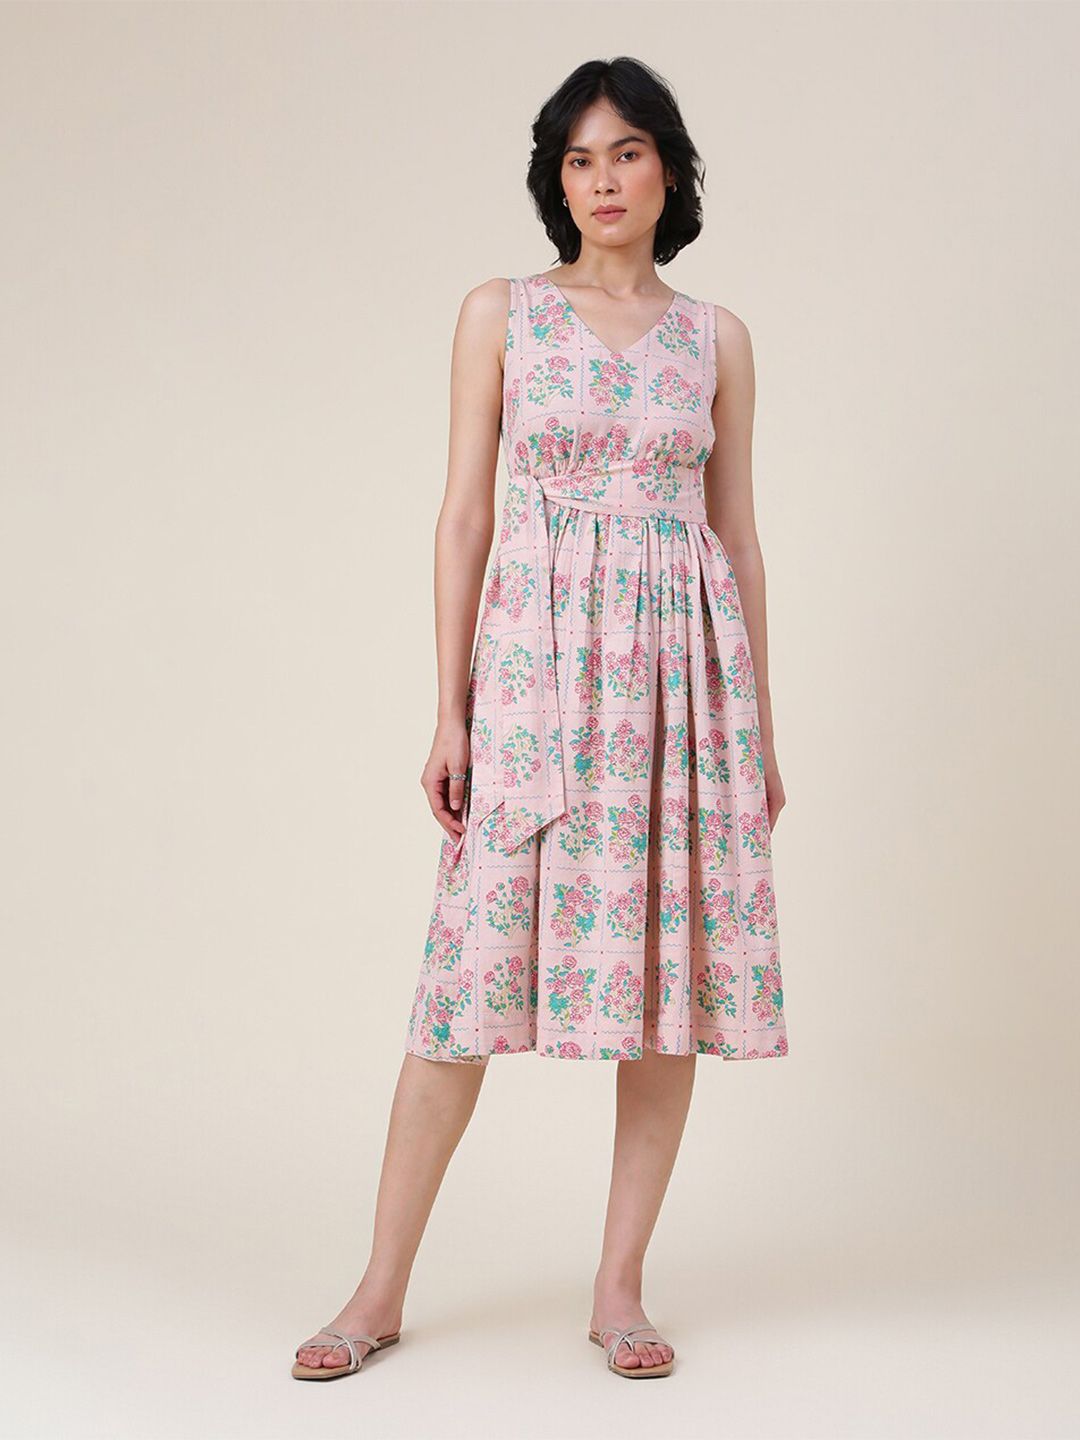 Fabindia Pink Floral A-Line Dress Price in India